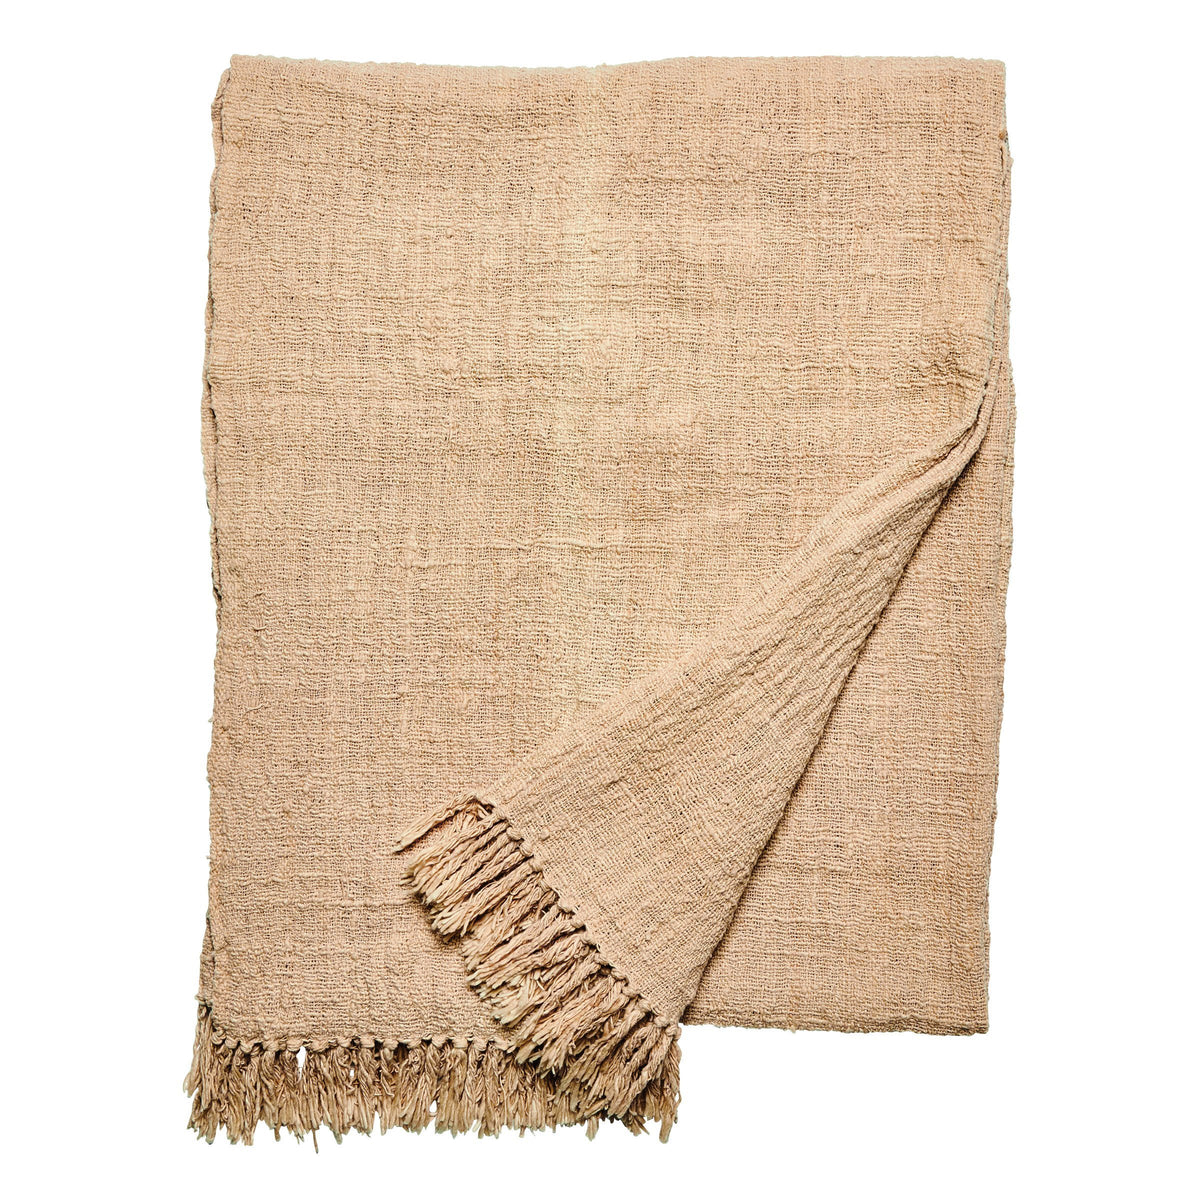 Plant dyed cotton throw (BSH1090)